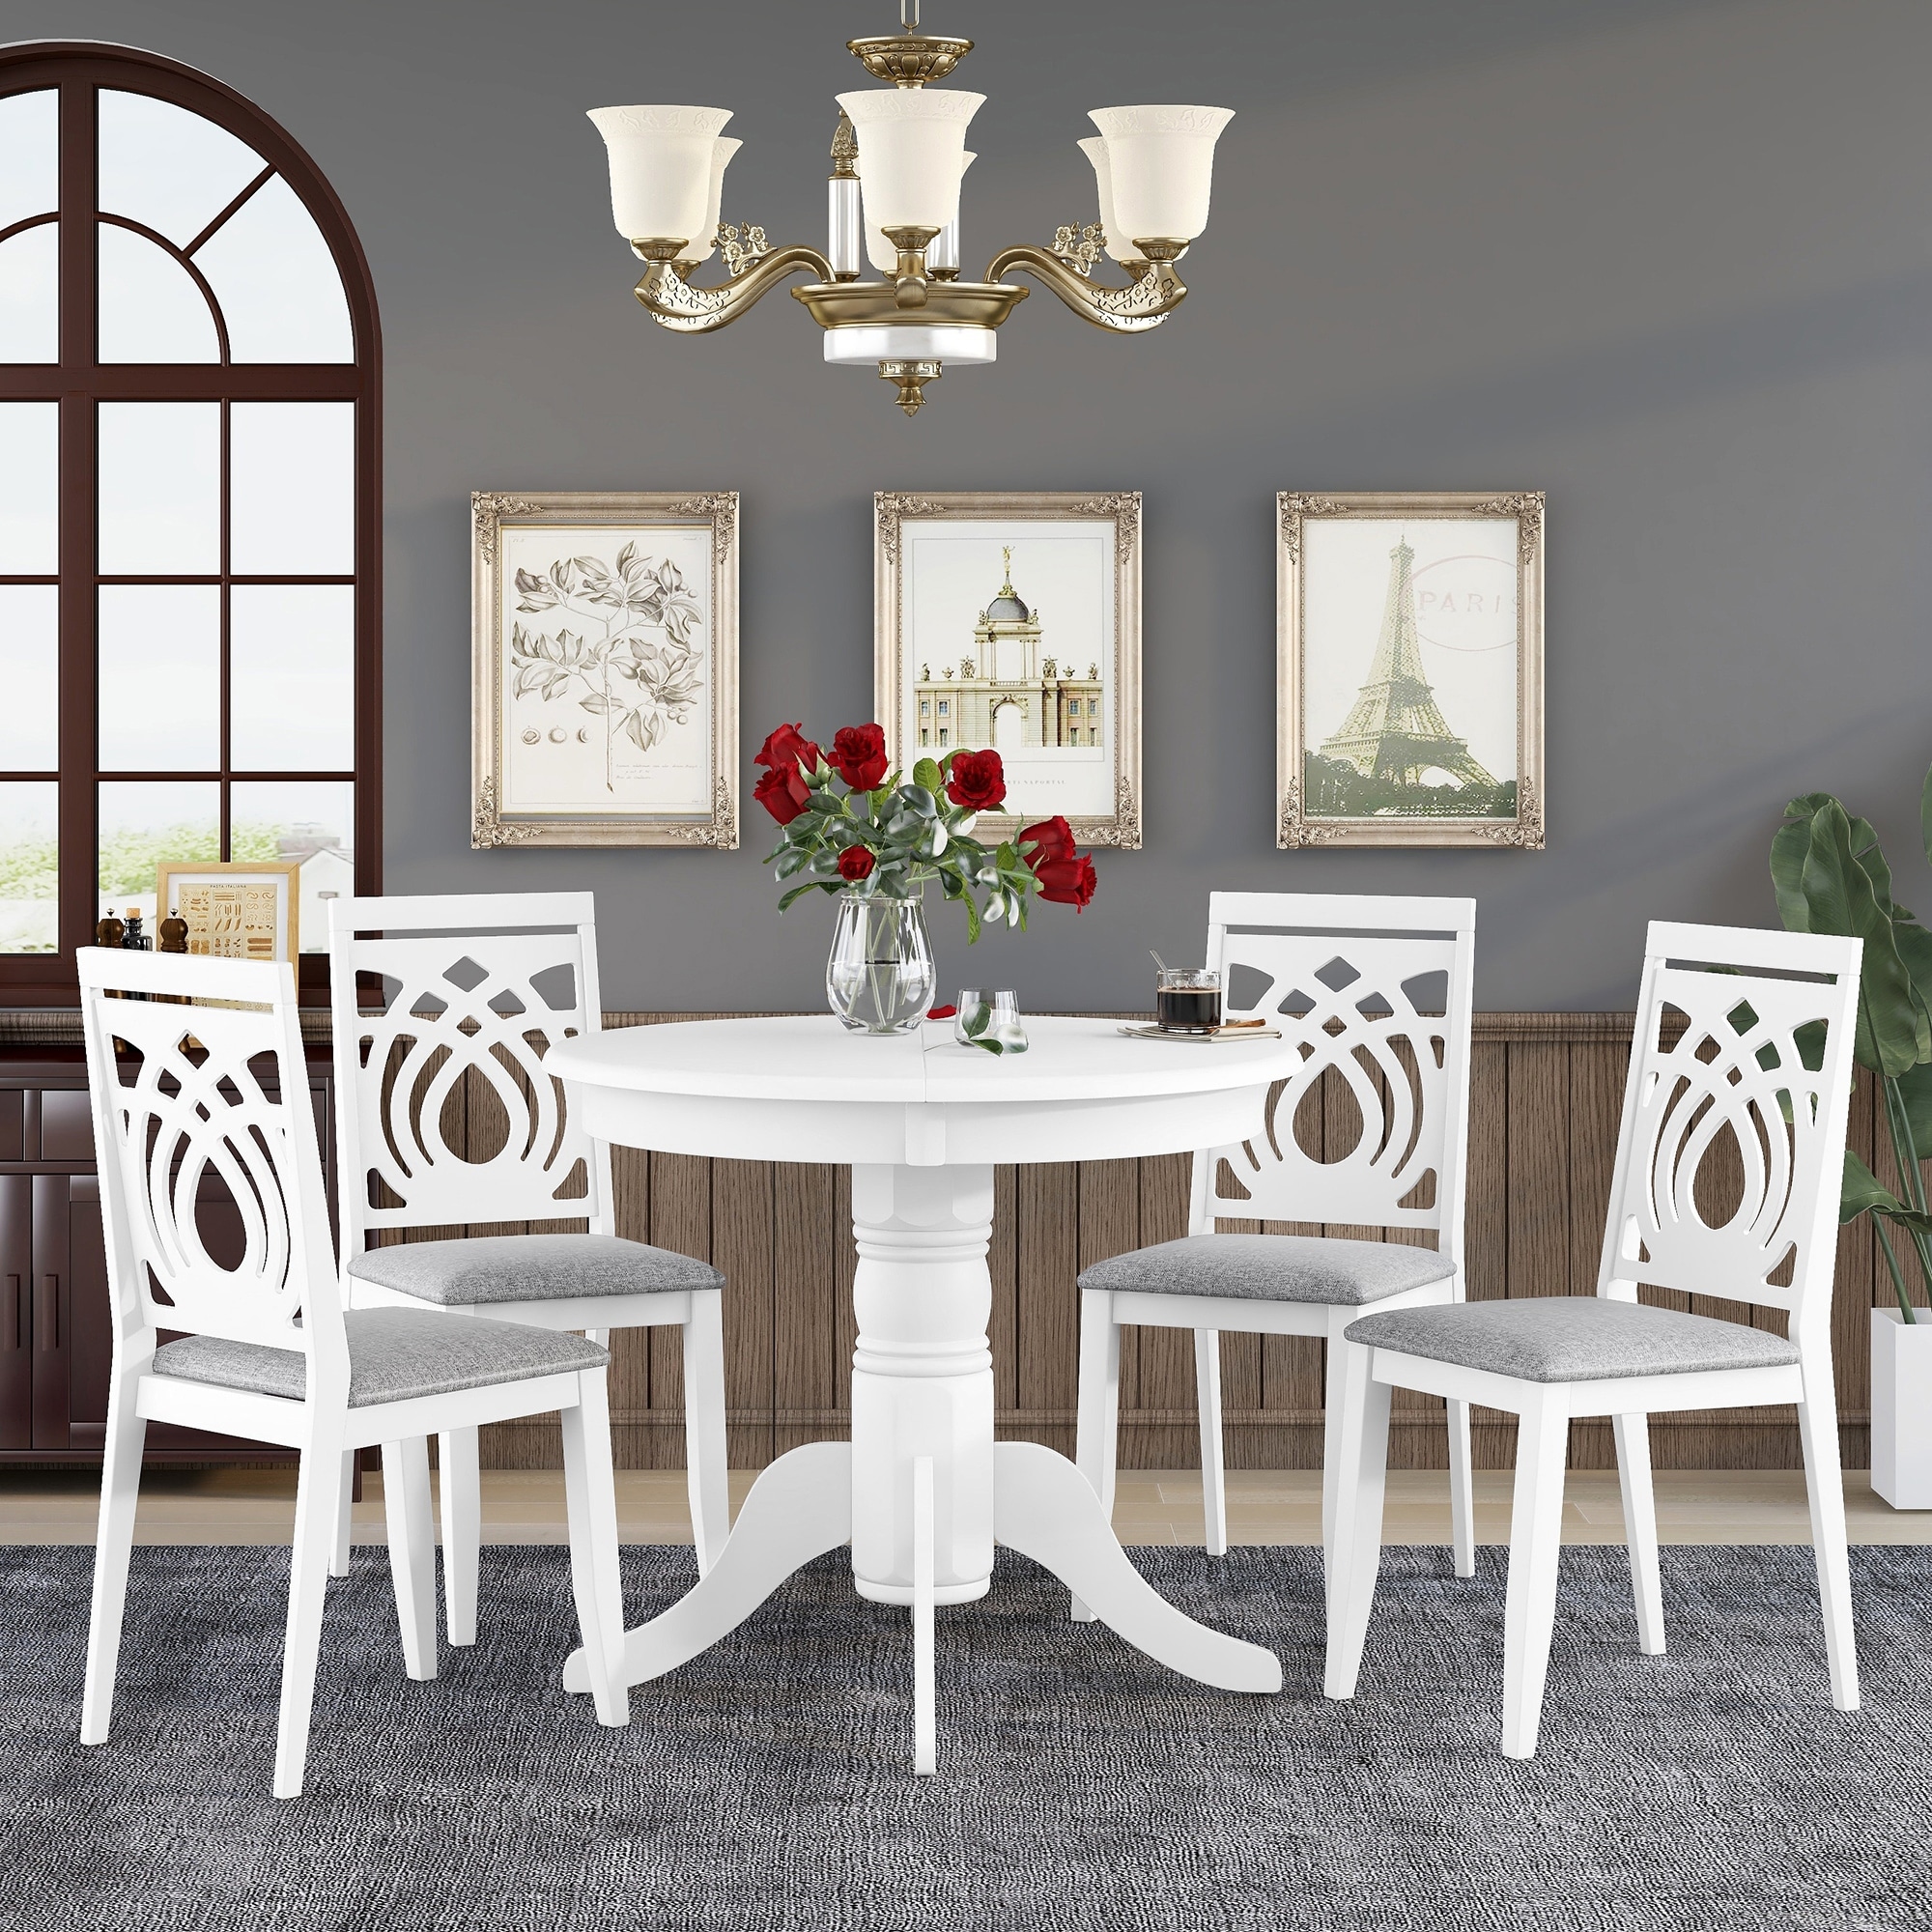 Farmhouse Rustic Style 5-piece Wooden Dining Set